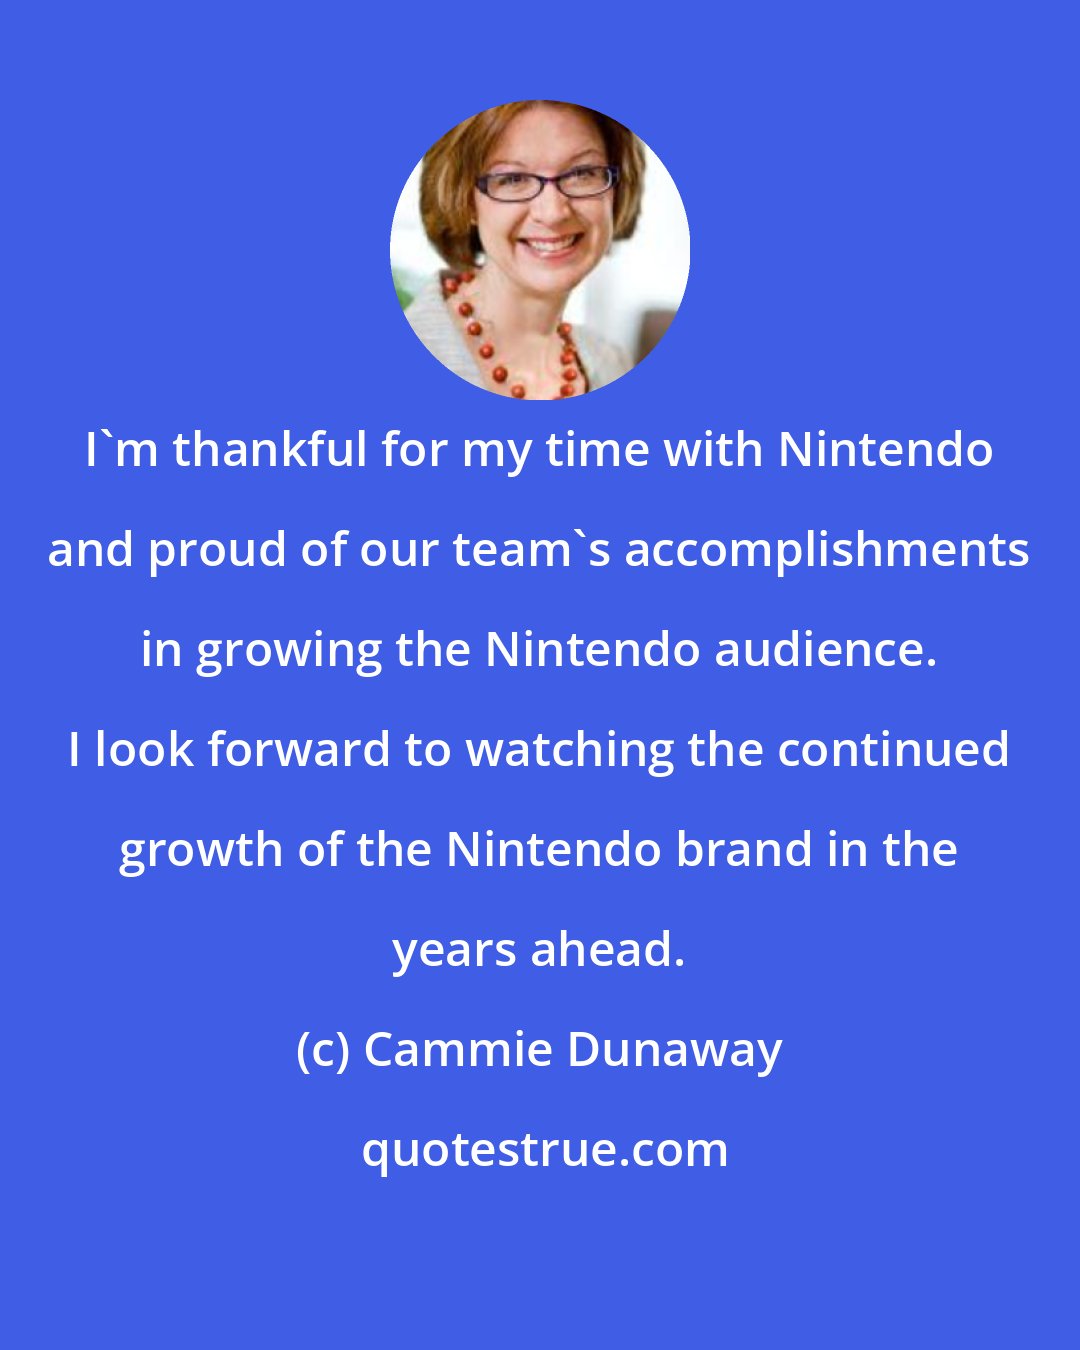 Cammie Dunaway: I'm thankful for my time with Nintendo and proud of our team's accomplishments in growing the Nintendo audience. I look forward to watching the continued growth of the Nintendo brand in the years ahead.